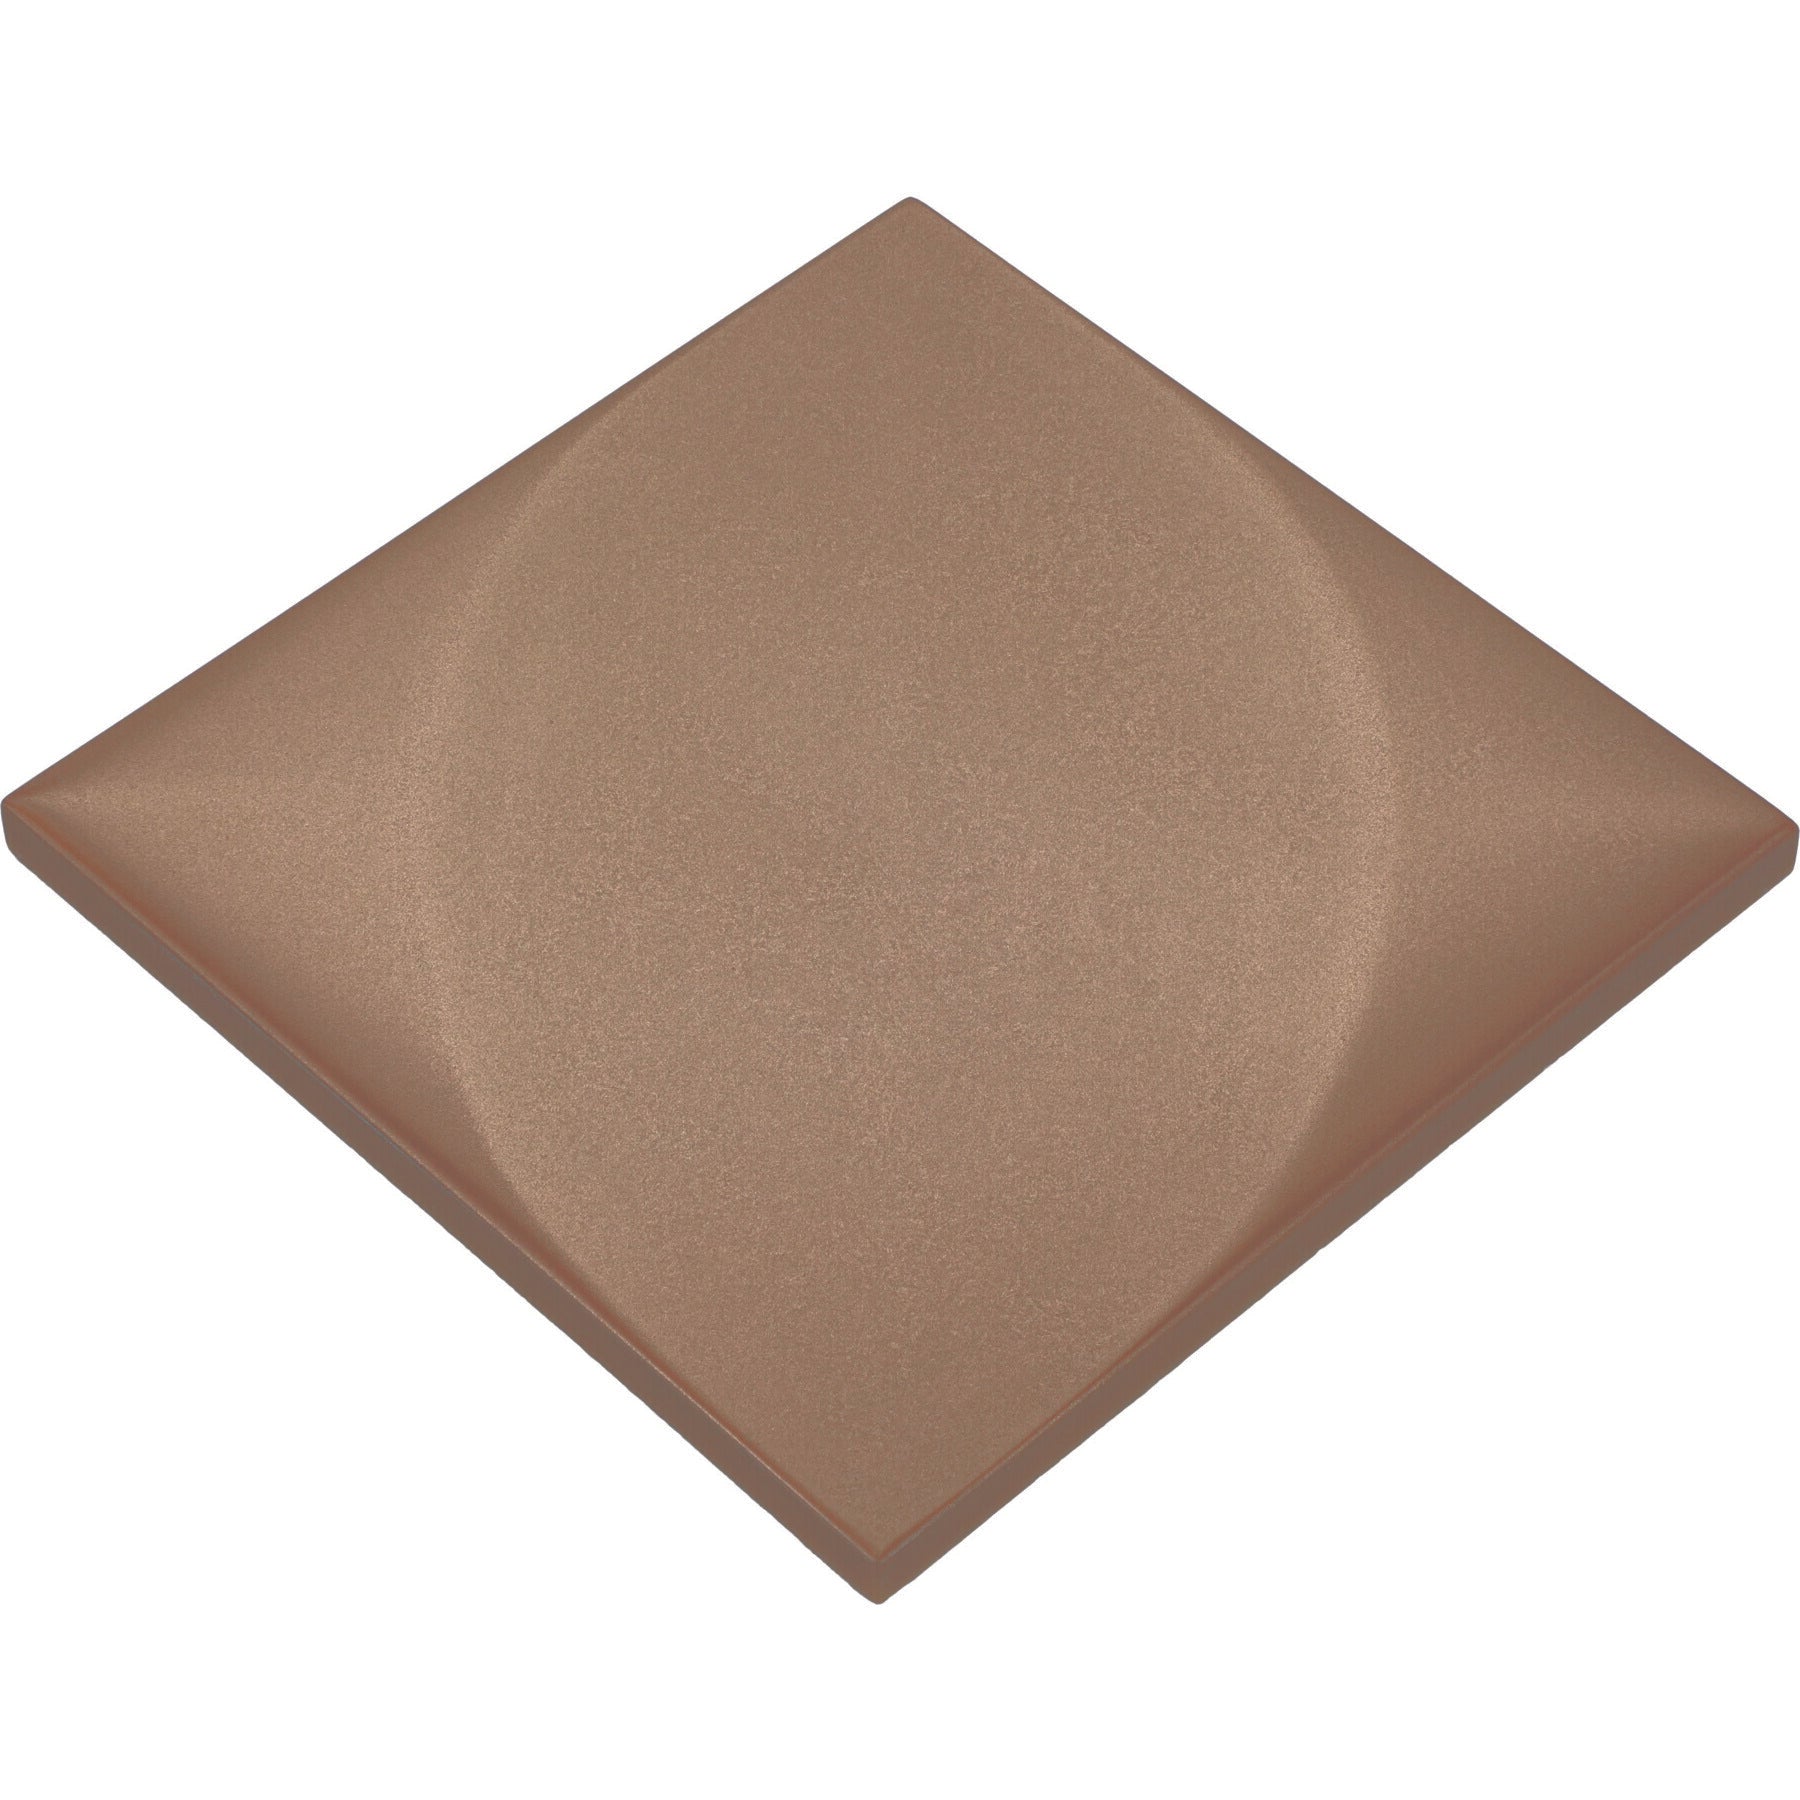 Daltile - STARE™ Collection - Electric 6 in. x 6 in. Tile - Petal Charge Bronze